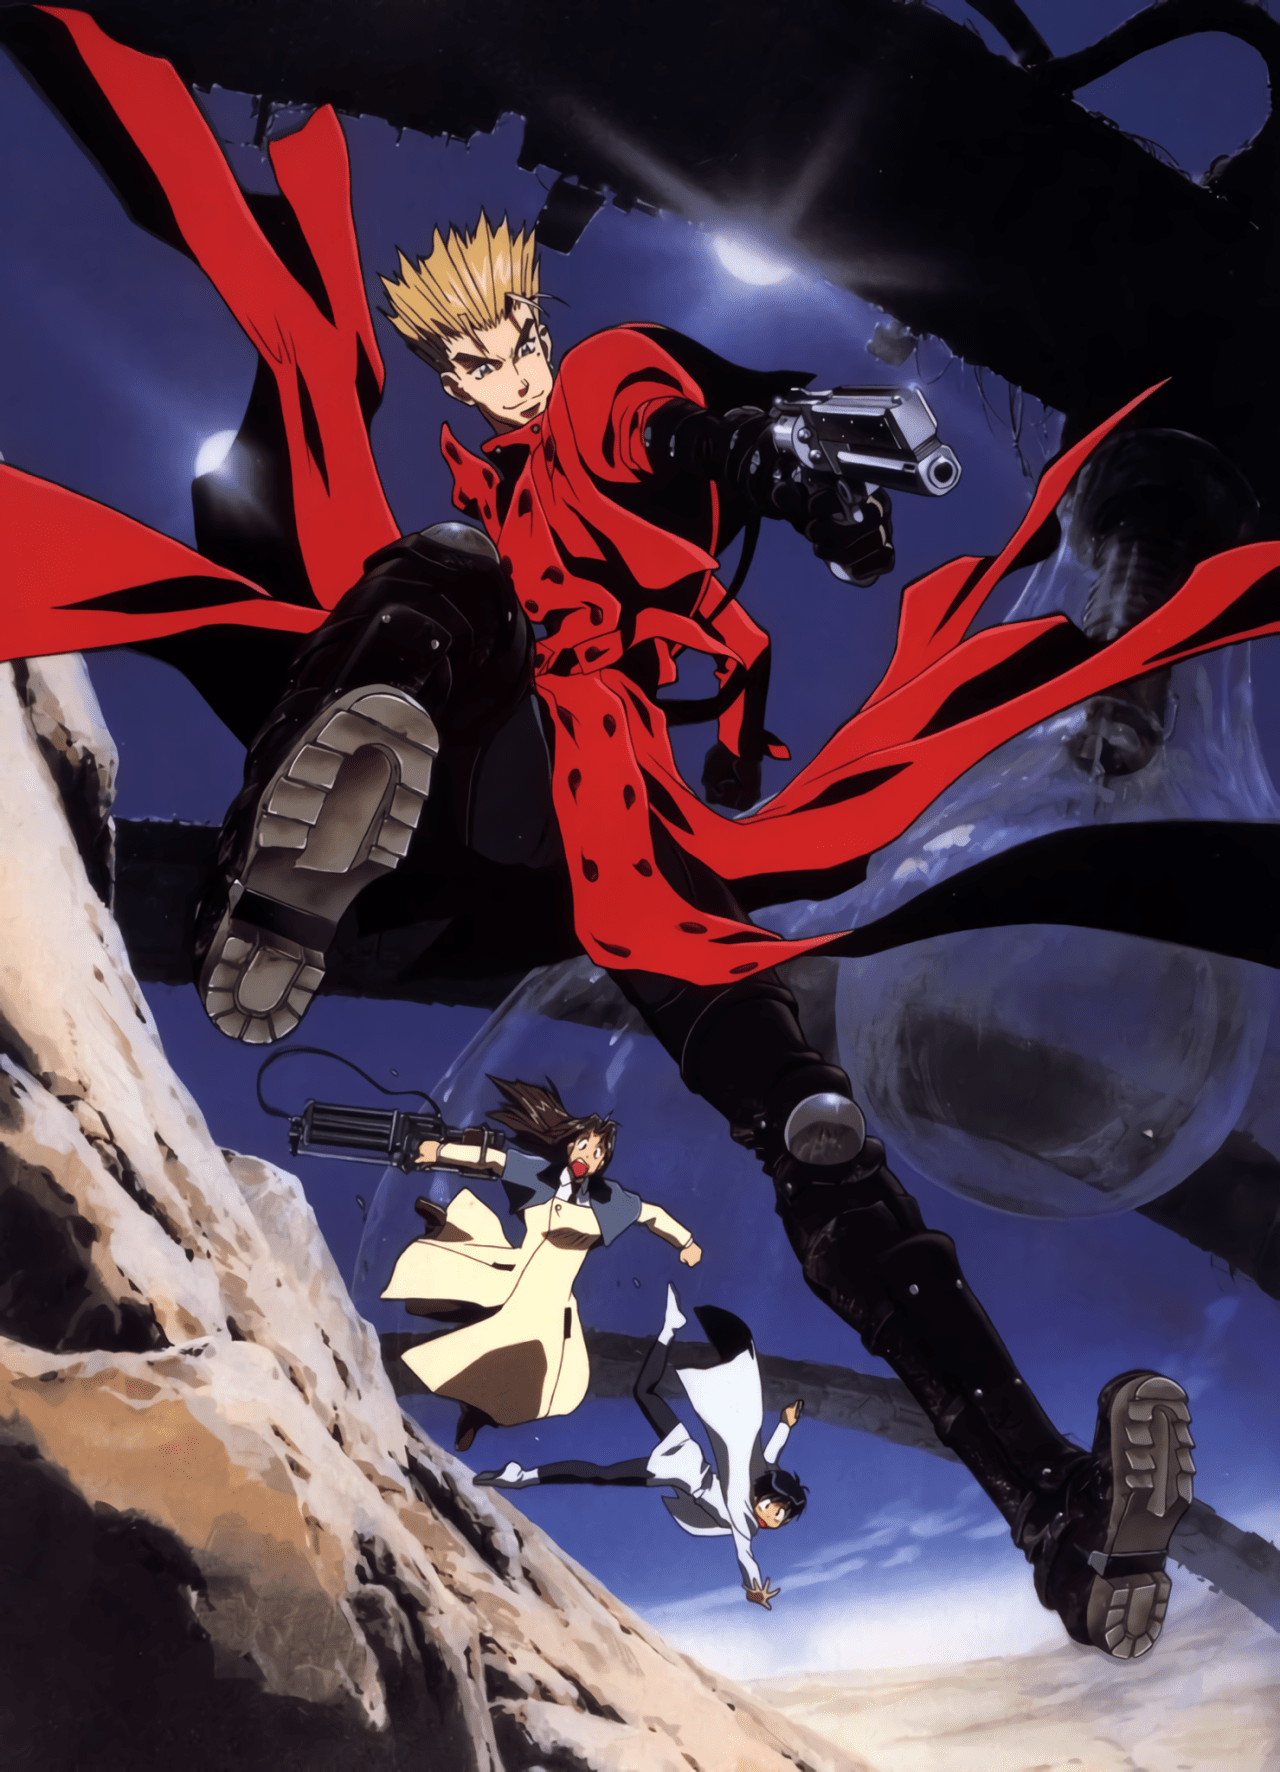 Trigun anime poster featuring Vash the Stampede and his red coat - 90s anime